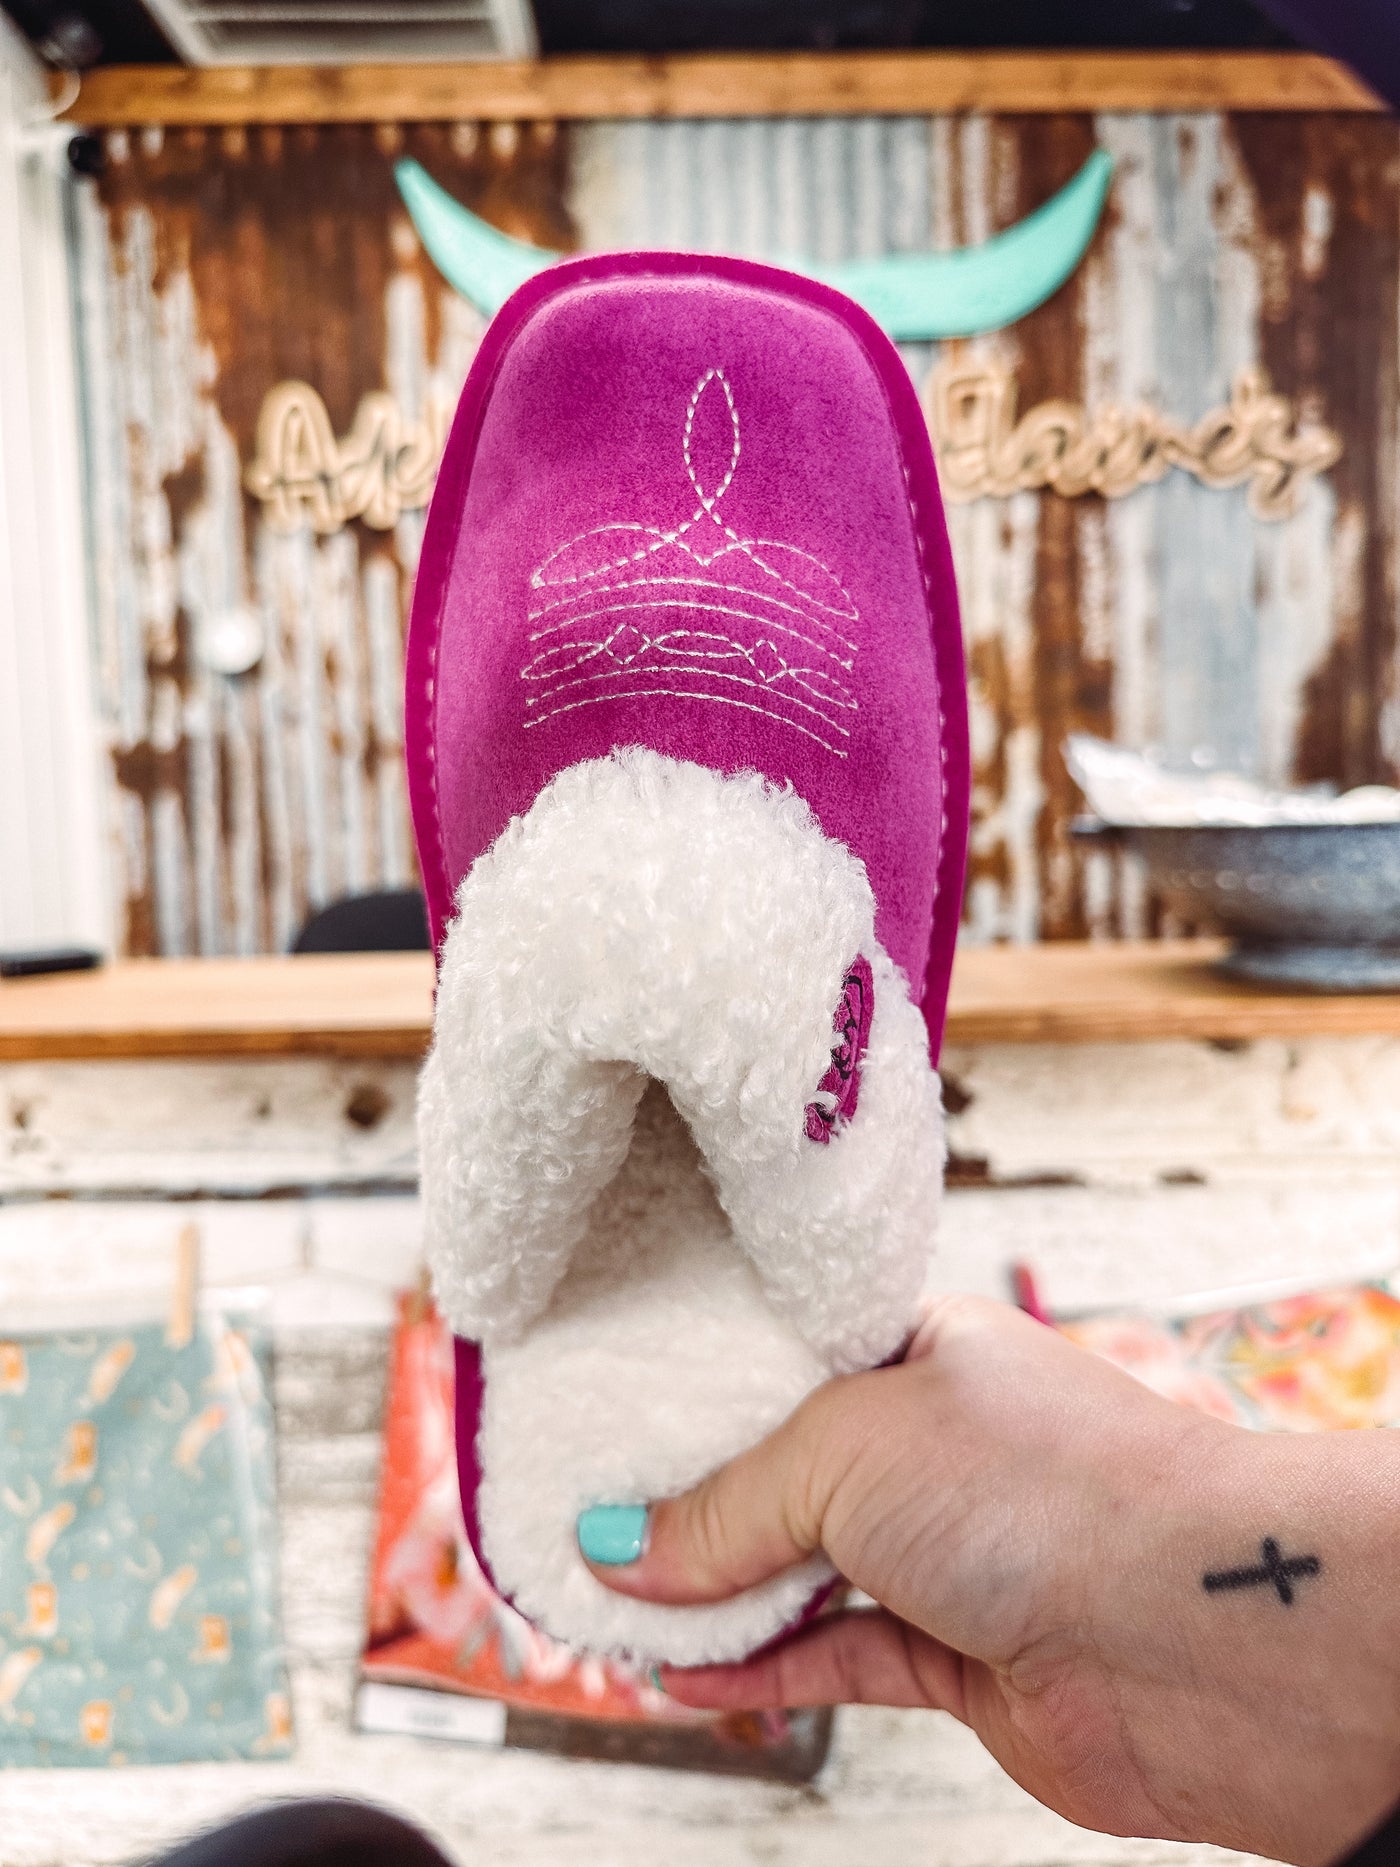 Jackie Square Toe Slipper - Very Berry Pink - Ariat - RESTOCK COMING